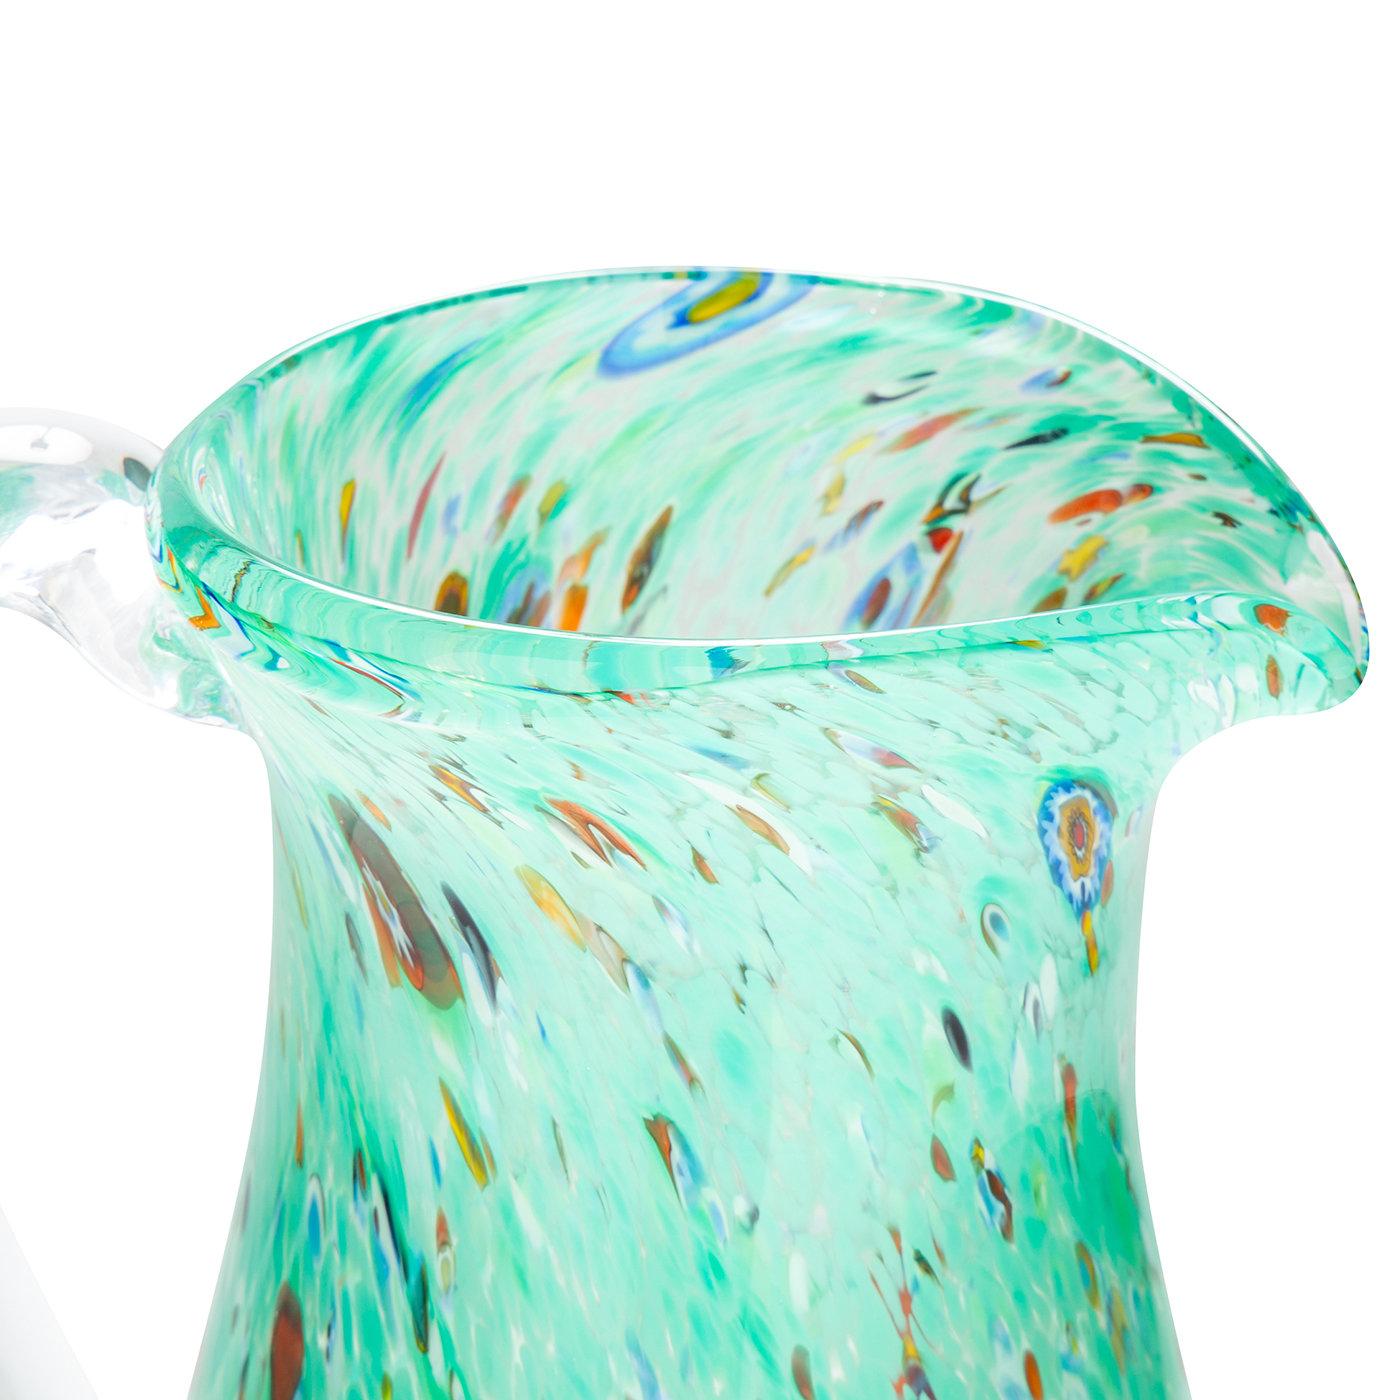 To stay hydrated in front of roaring furnaces, Venetian glass masters would craft personalized drinking glasses of their own styling. Getting its name from the Venetian word for cup - goto - the GO.TO Sea Green Pitcher is a nod to this tradition,